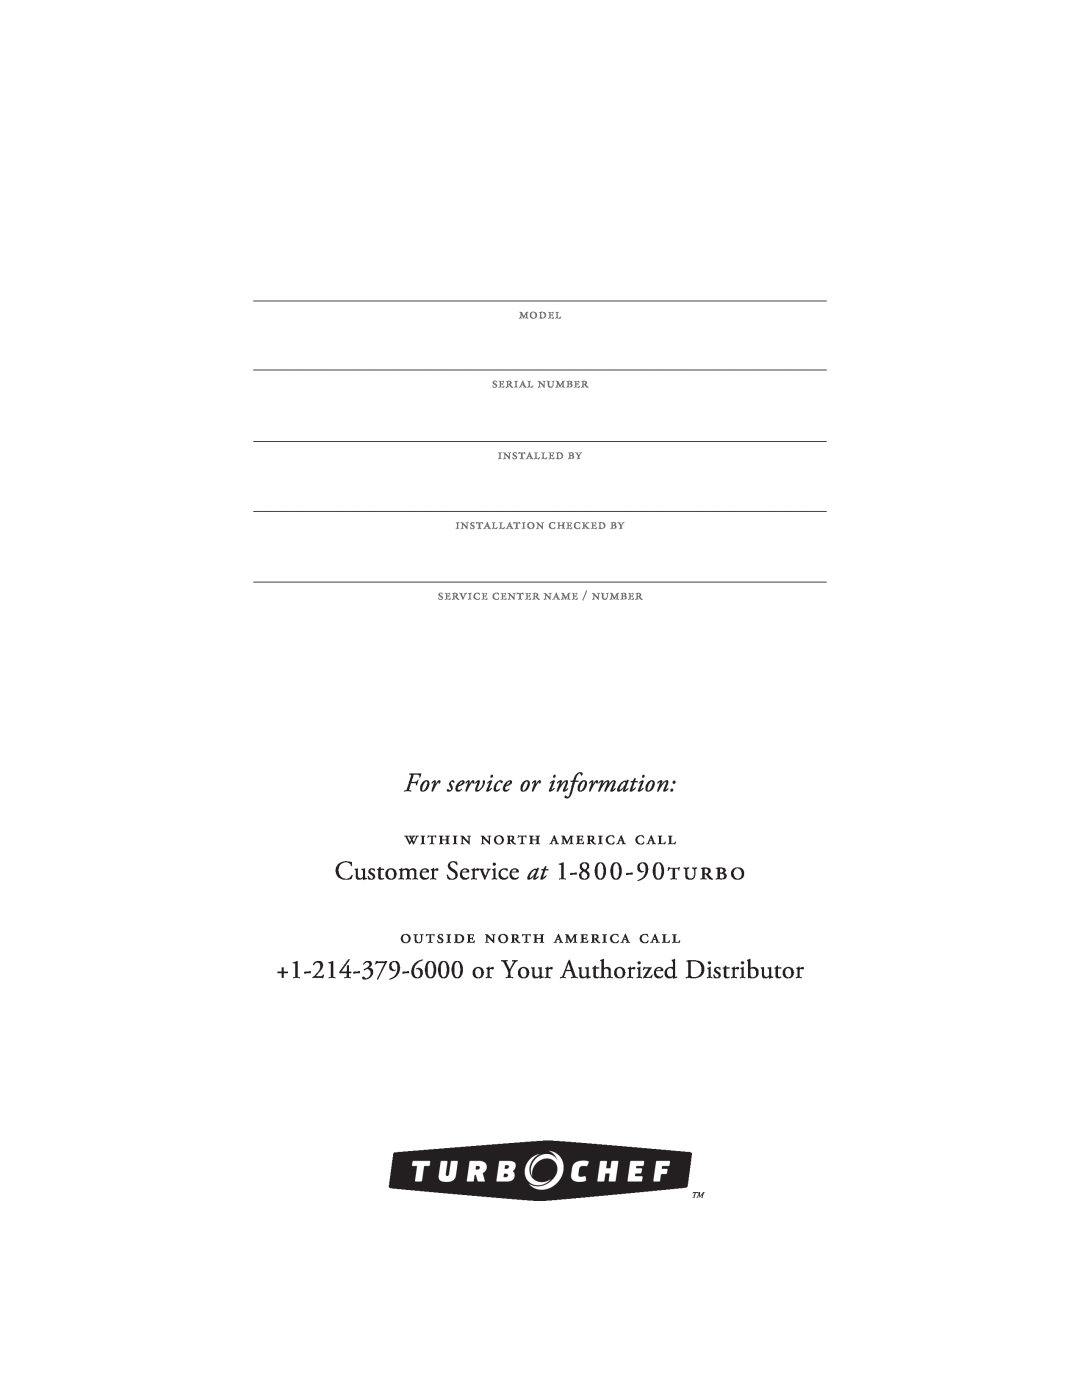 Turbo Chef Technologies 2TM manual For service or information, +1-214-379-6000or Your Authorized Distributor 